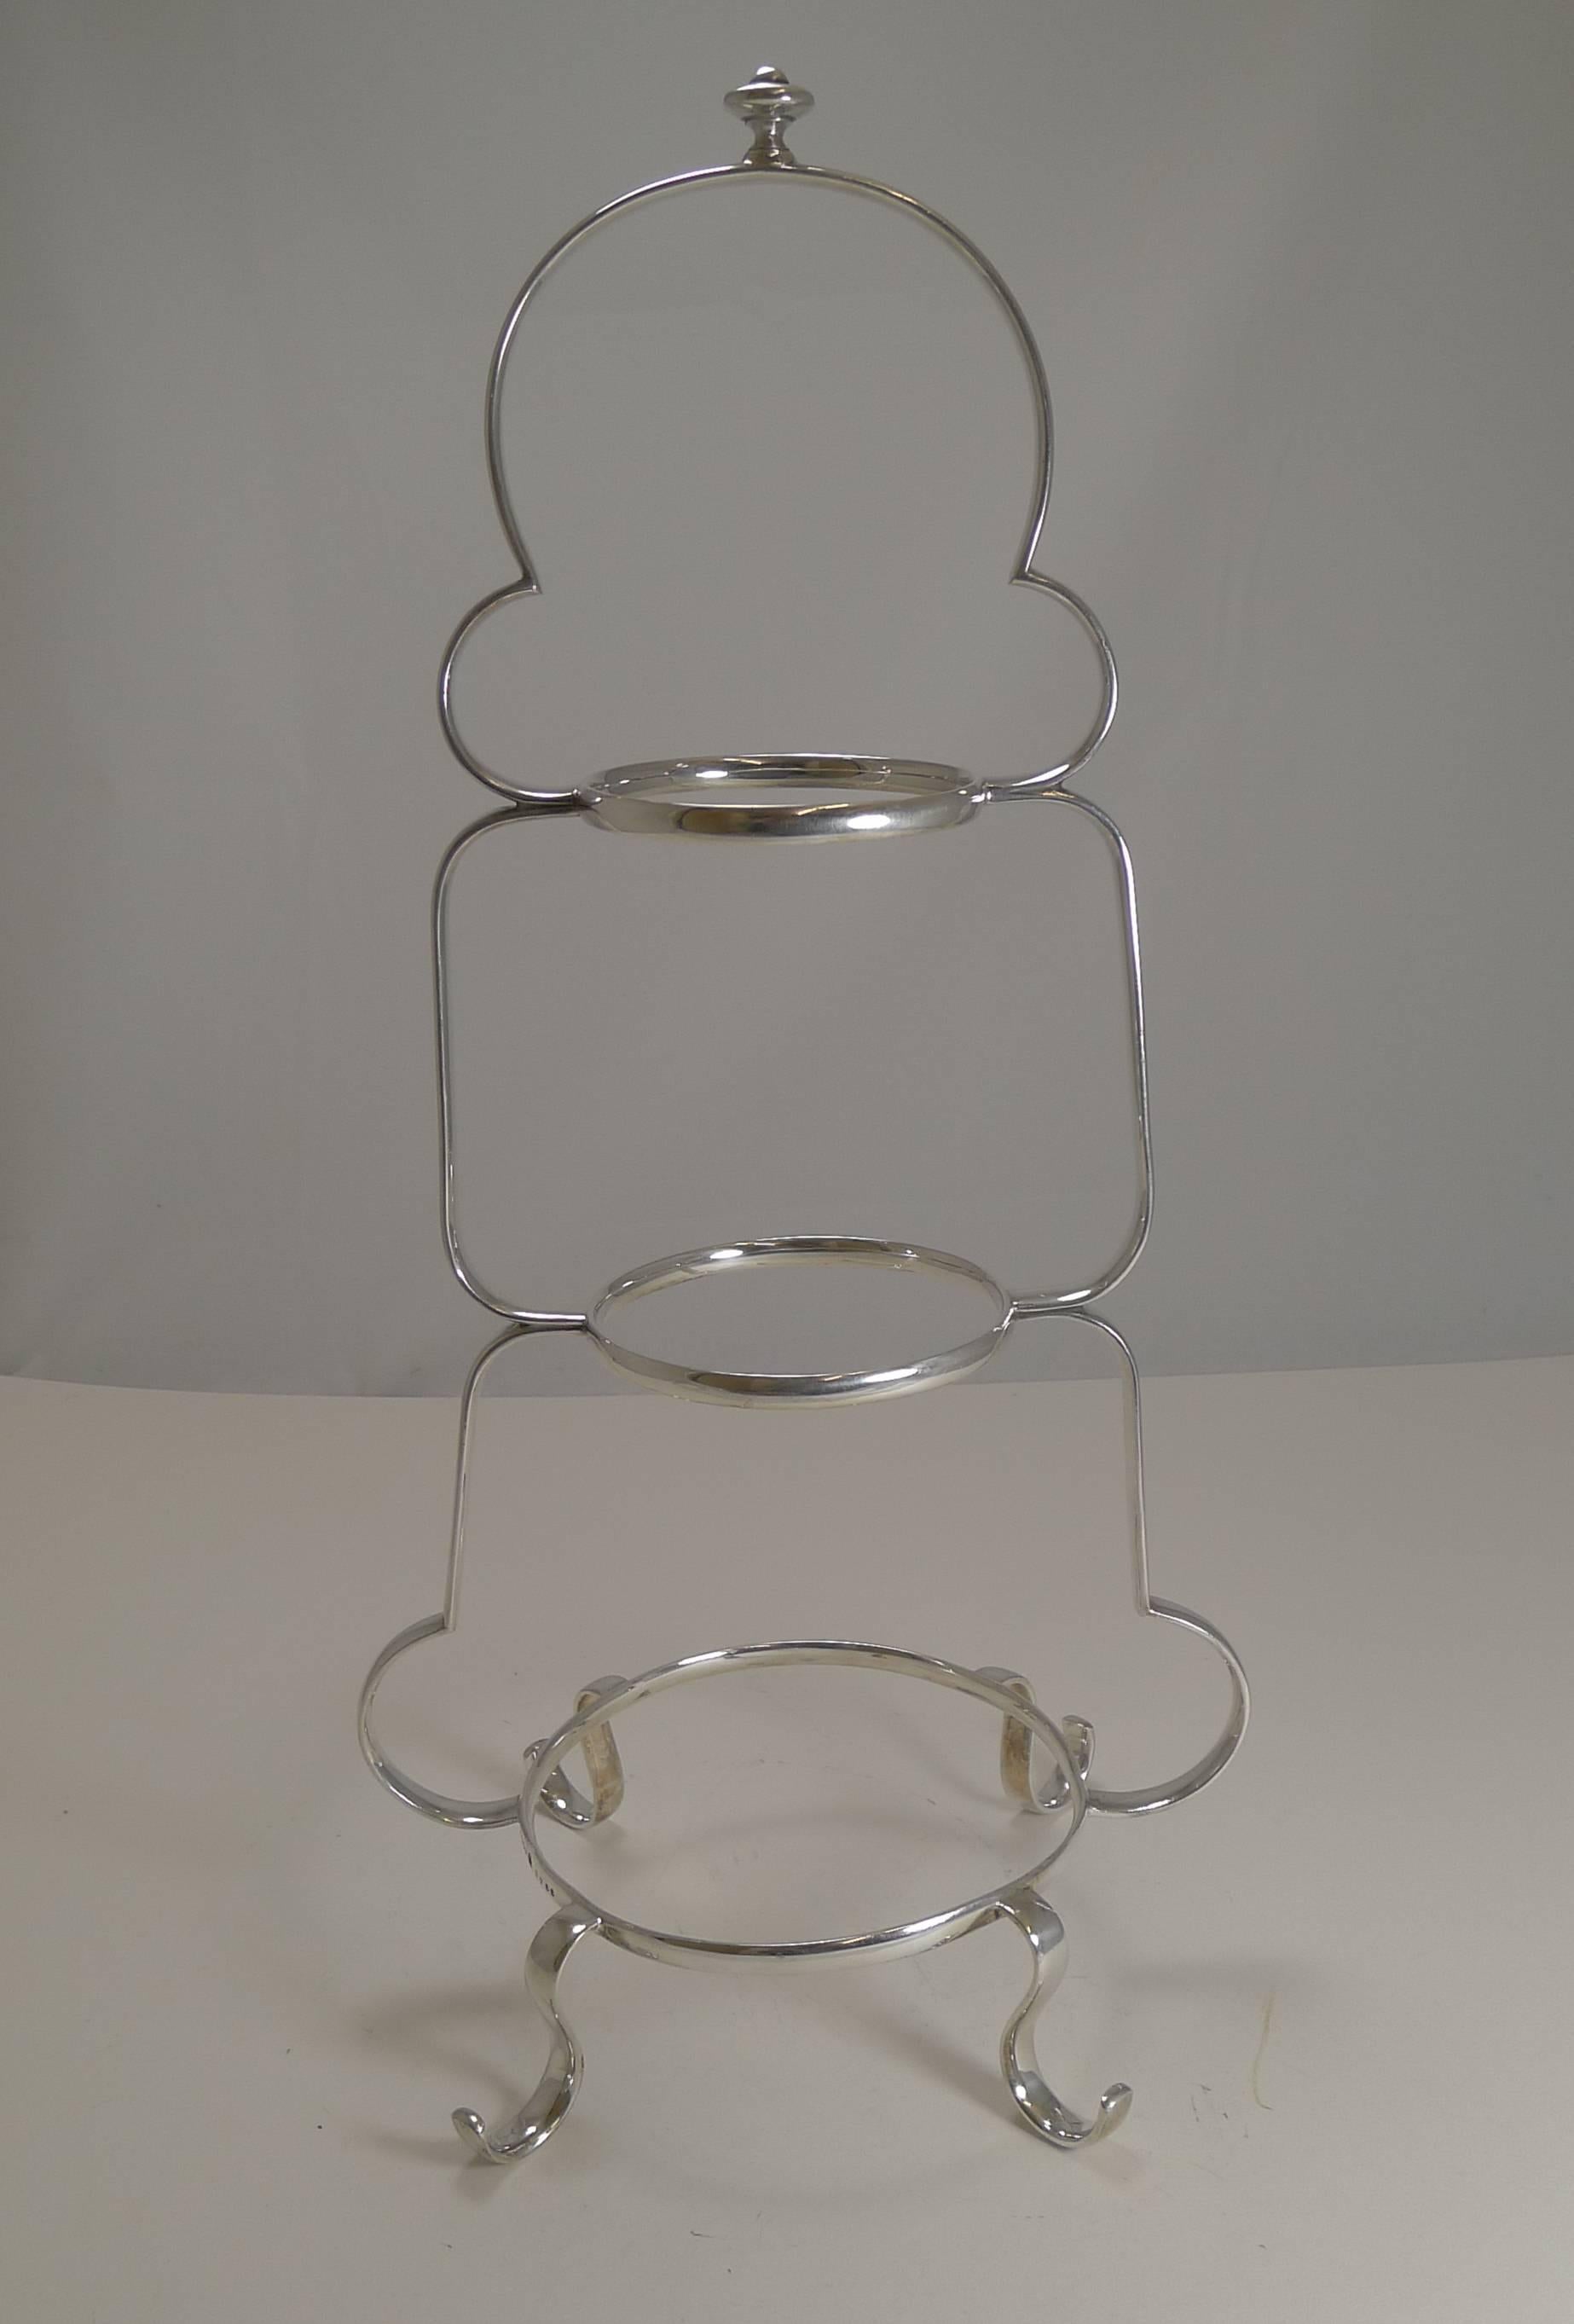 Early 20th Century Antique English Silver Plated Graduated Cake Stand, circa 1900